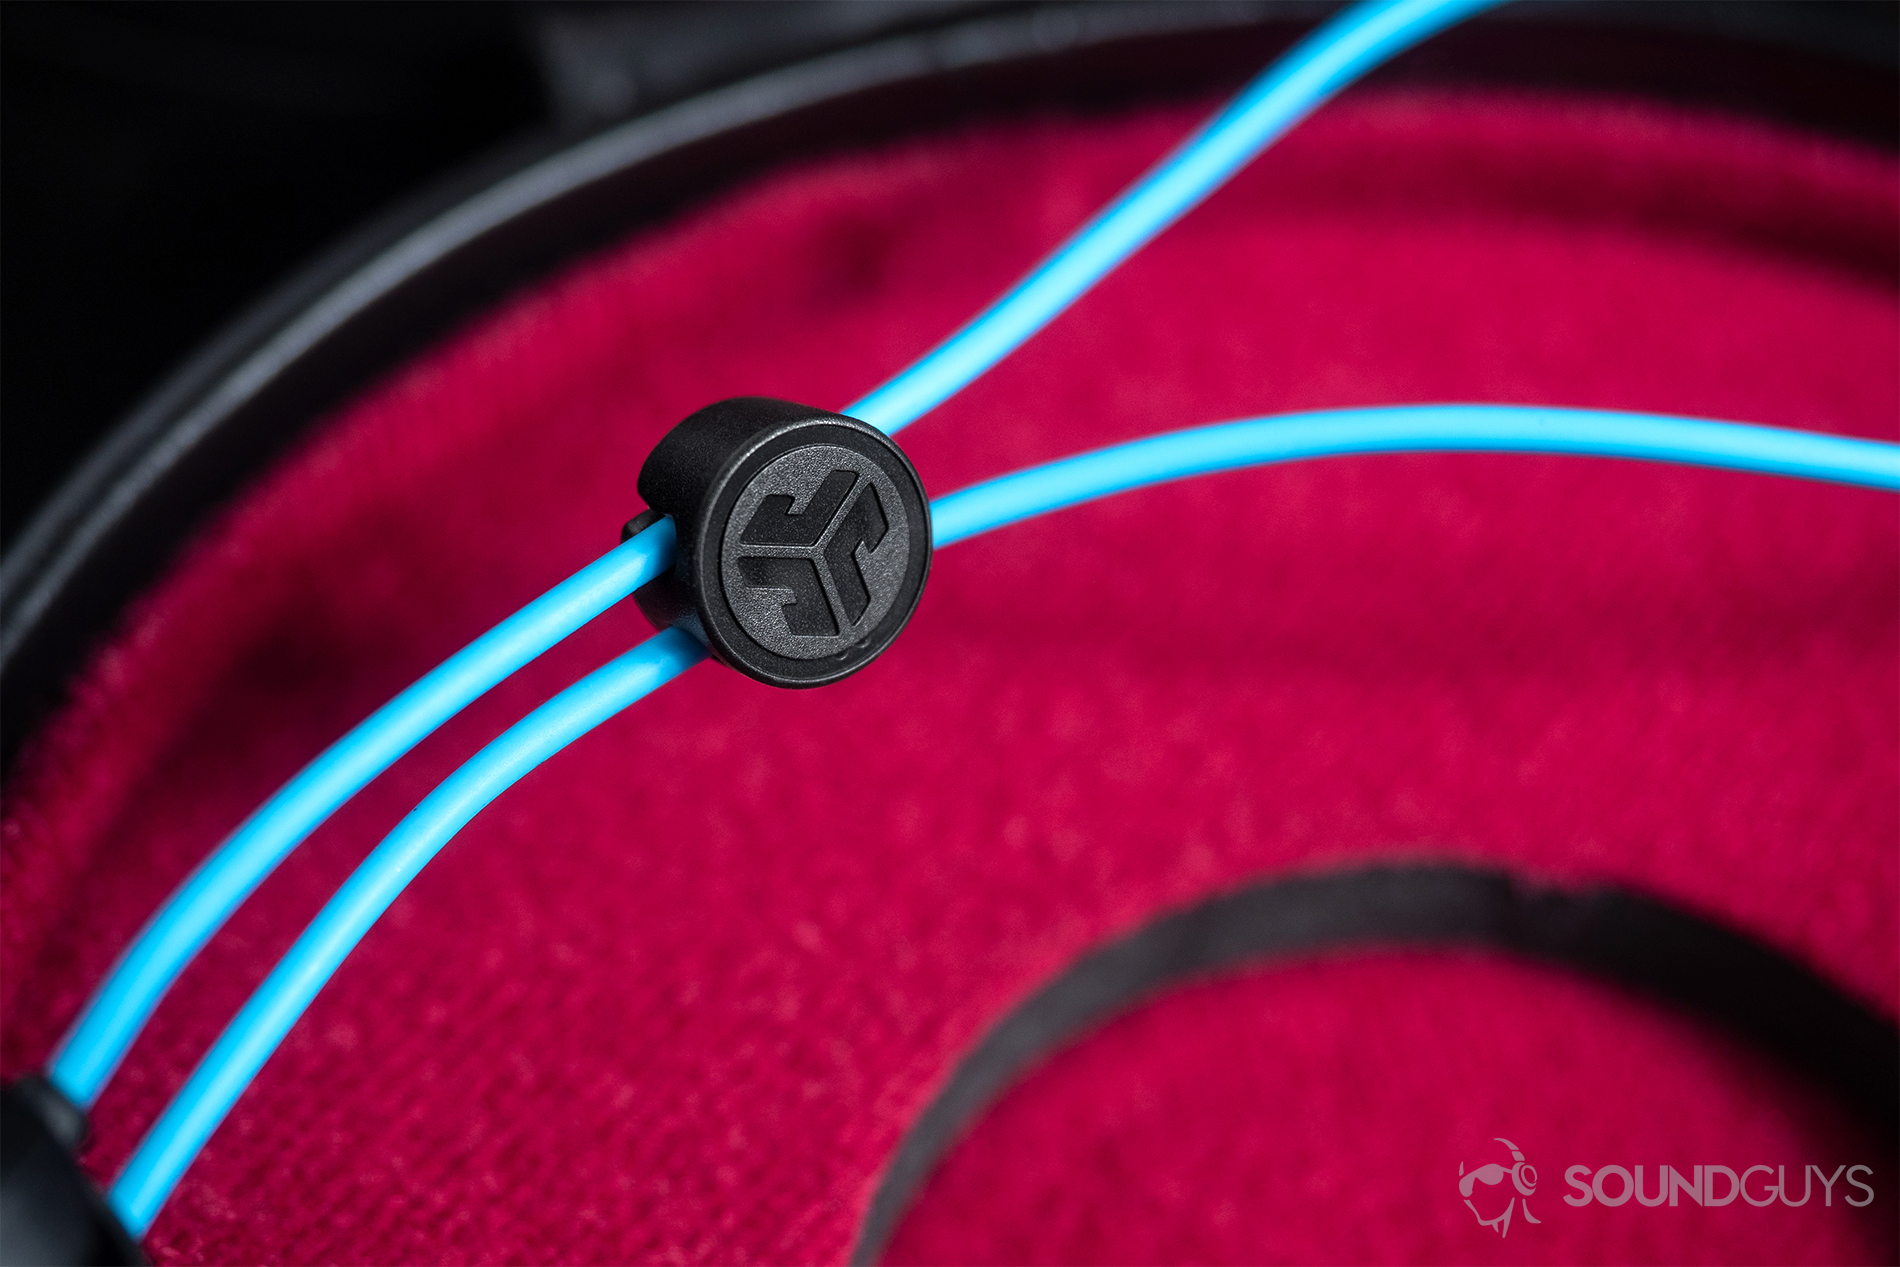 JLab Fit Sport Wireless: The cable management mechanism on the back of the wire joining both earbuds.